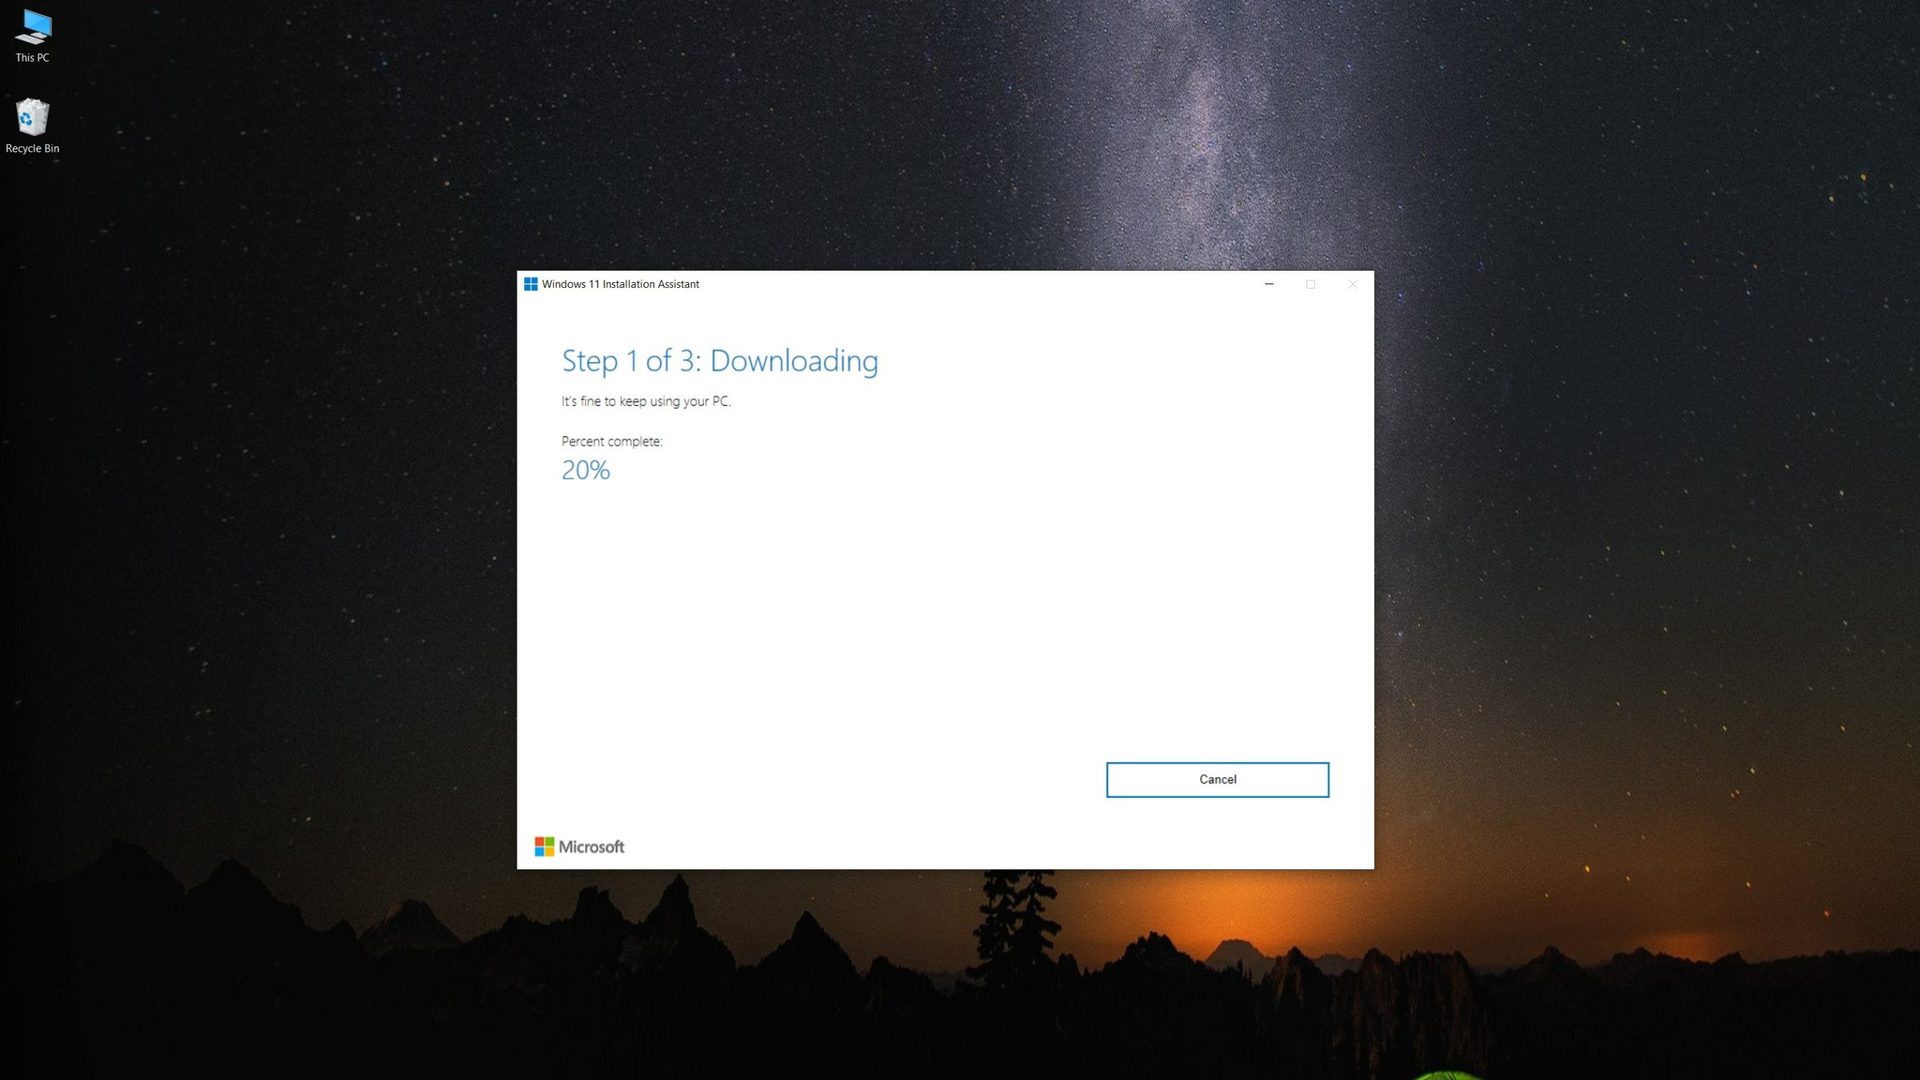 Windows 11 installation assistant downloading